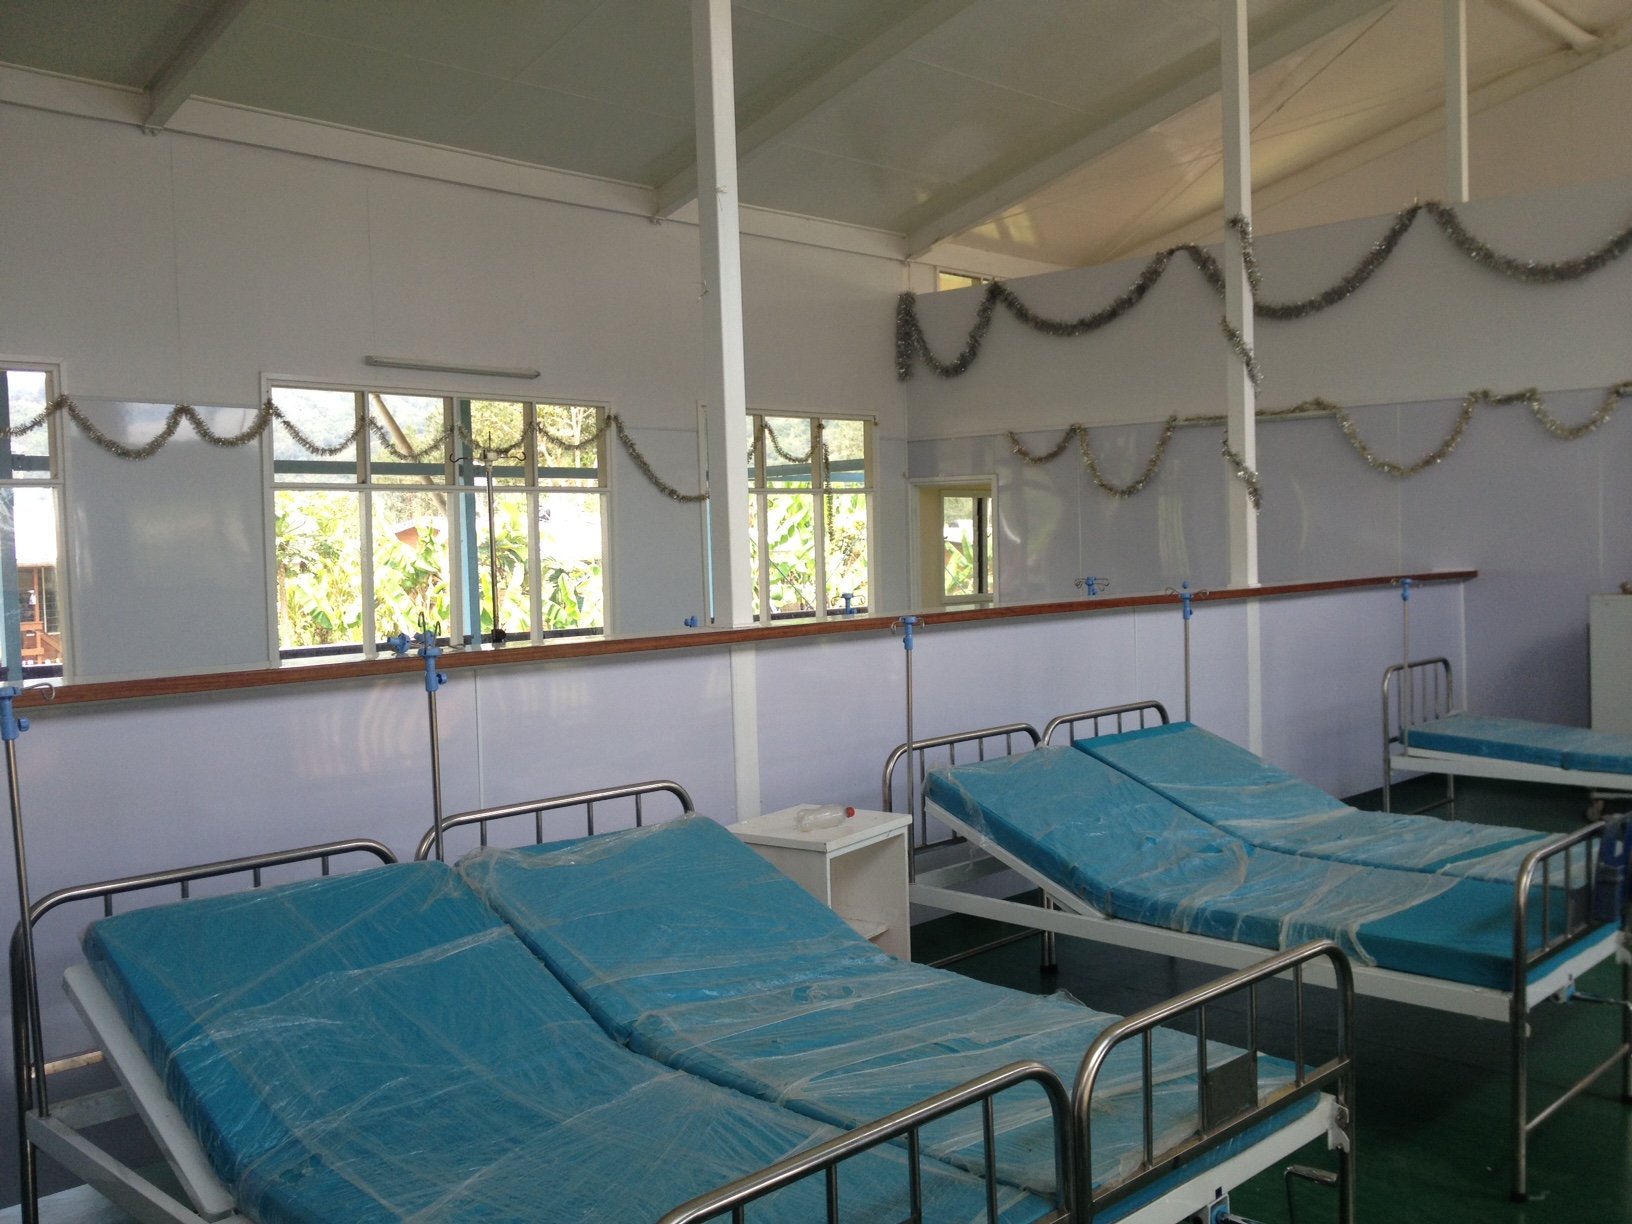 Inside the new maternity wing